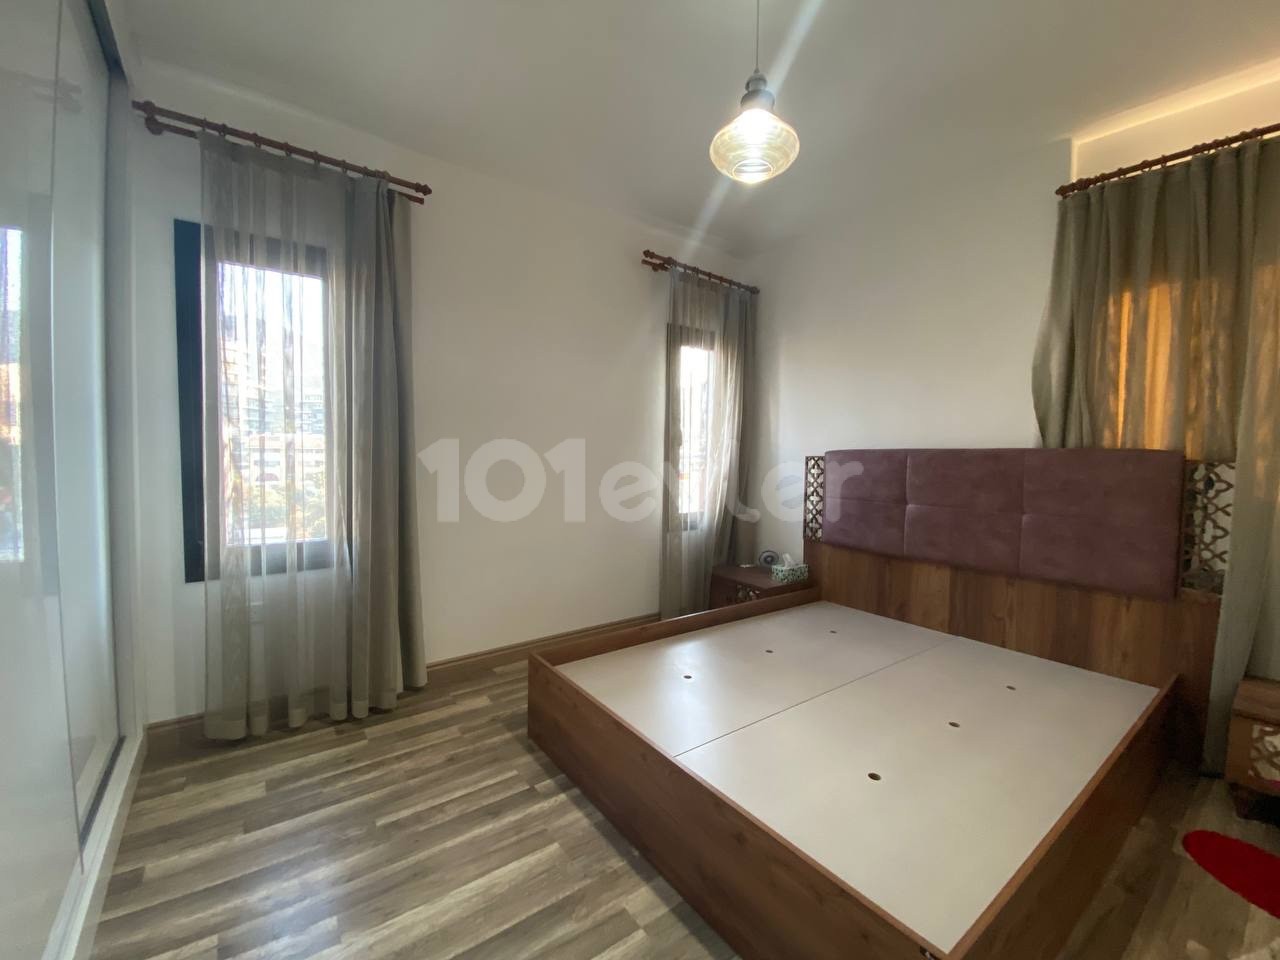 Located in the Center of Kyrenia, Near the Piabella Hotel And the New Shopping Center, Next to the Children's park, We Have A 2-Bedroom Apartment Centrally Located ** 